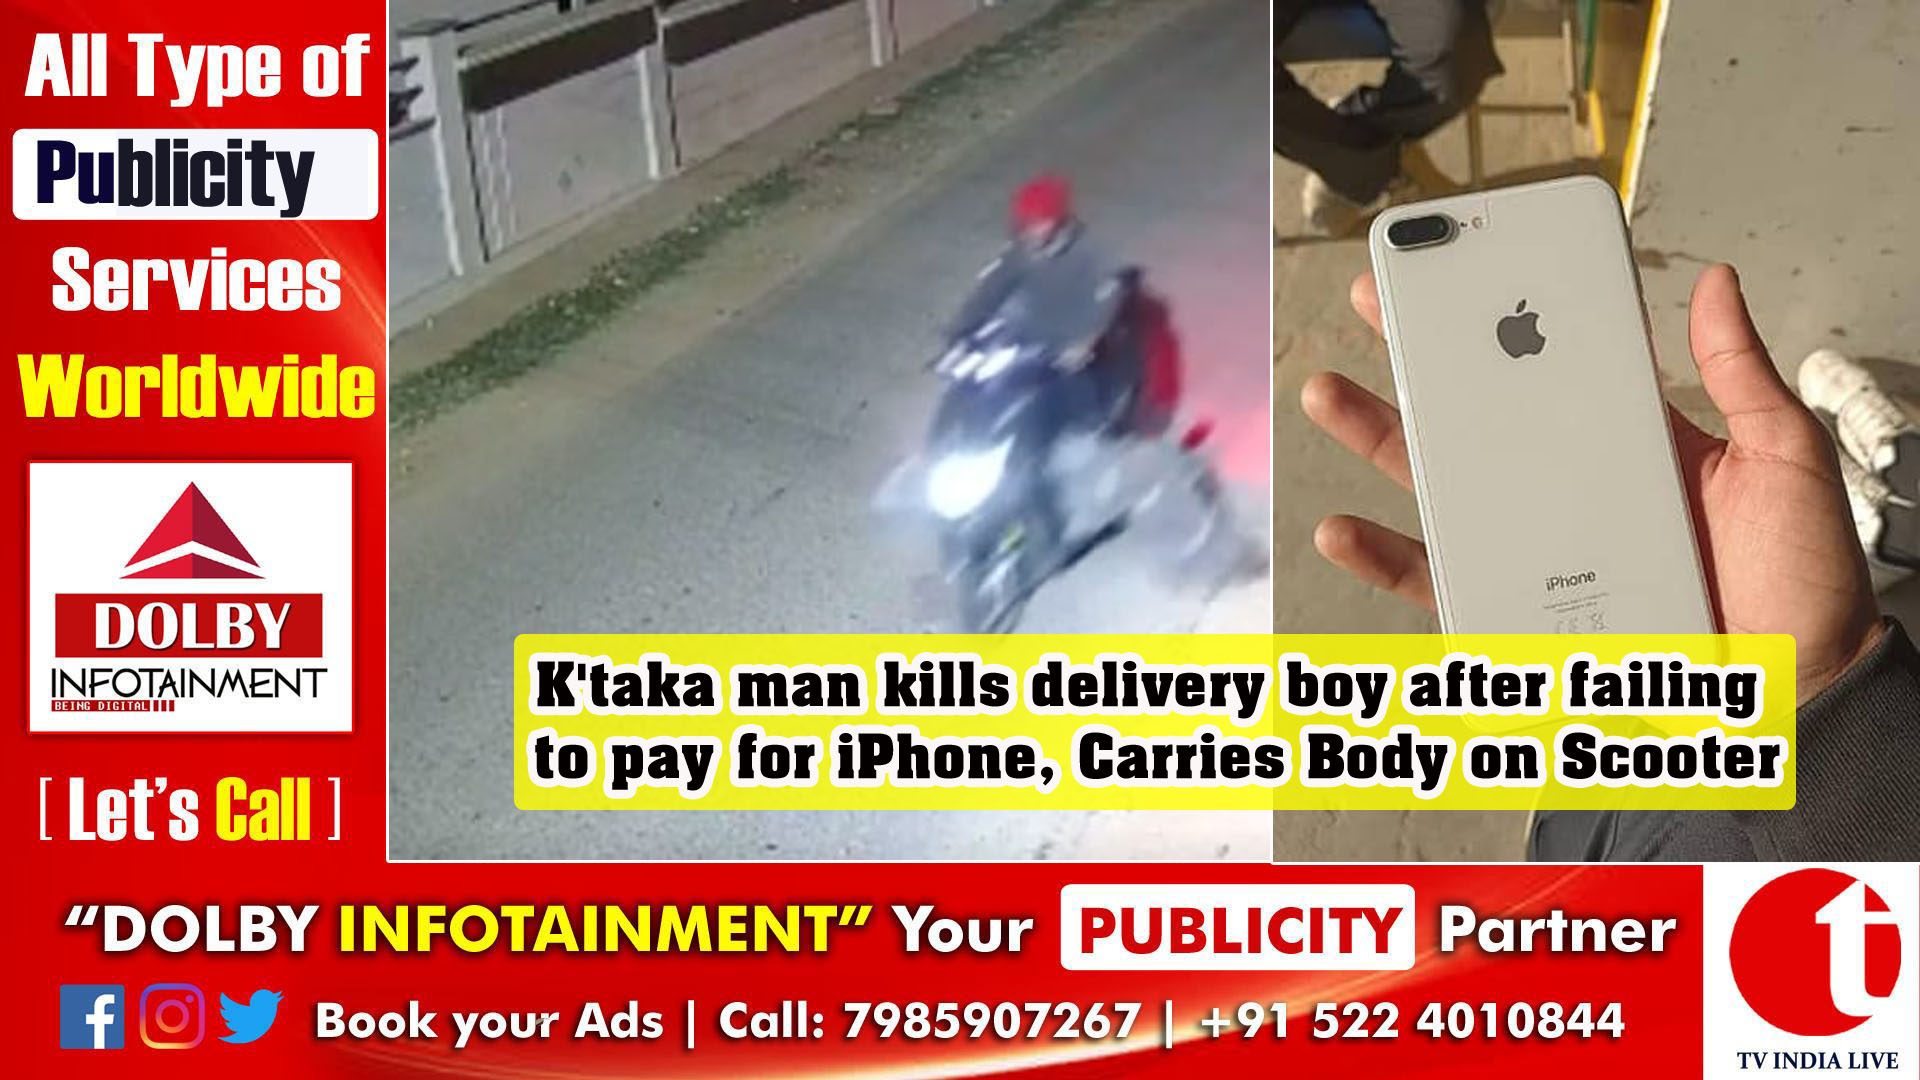 K'taka man kills delivery boy after failing to pay for iPhone, Carries Body on Scooter